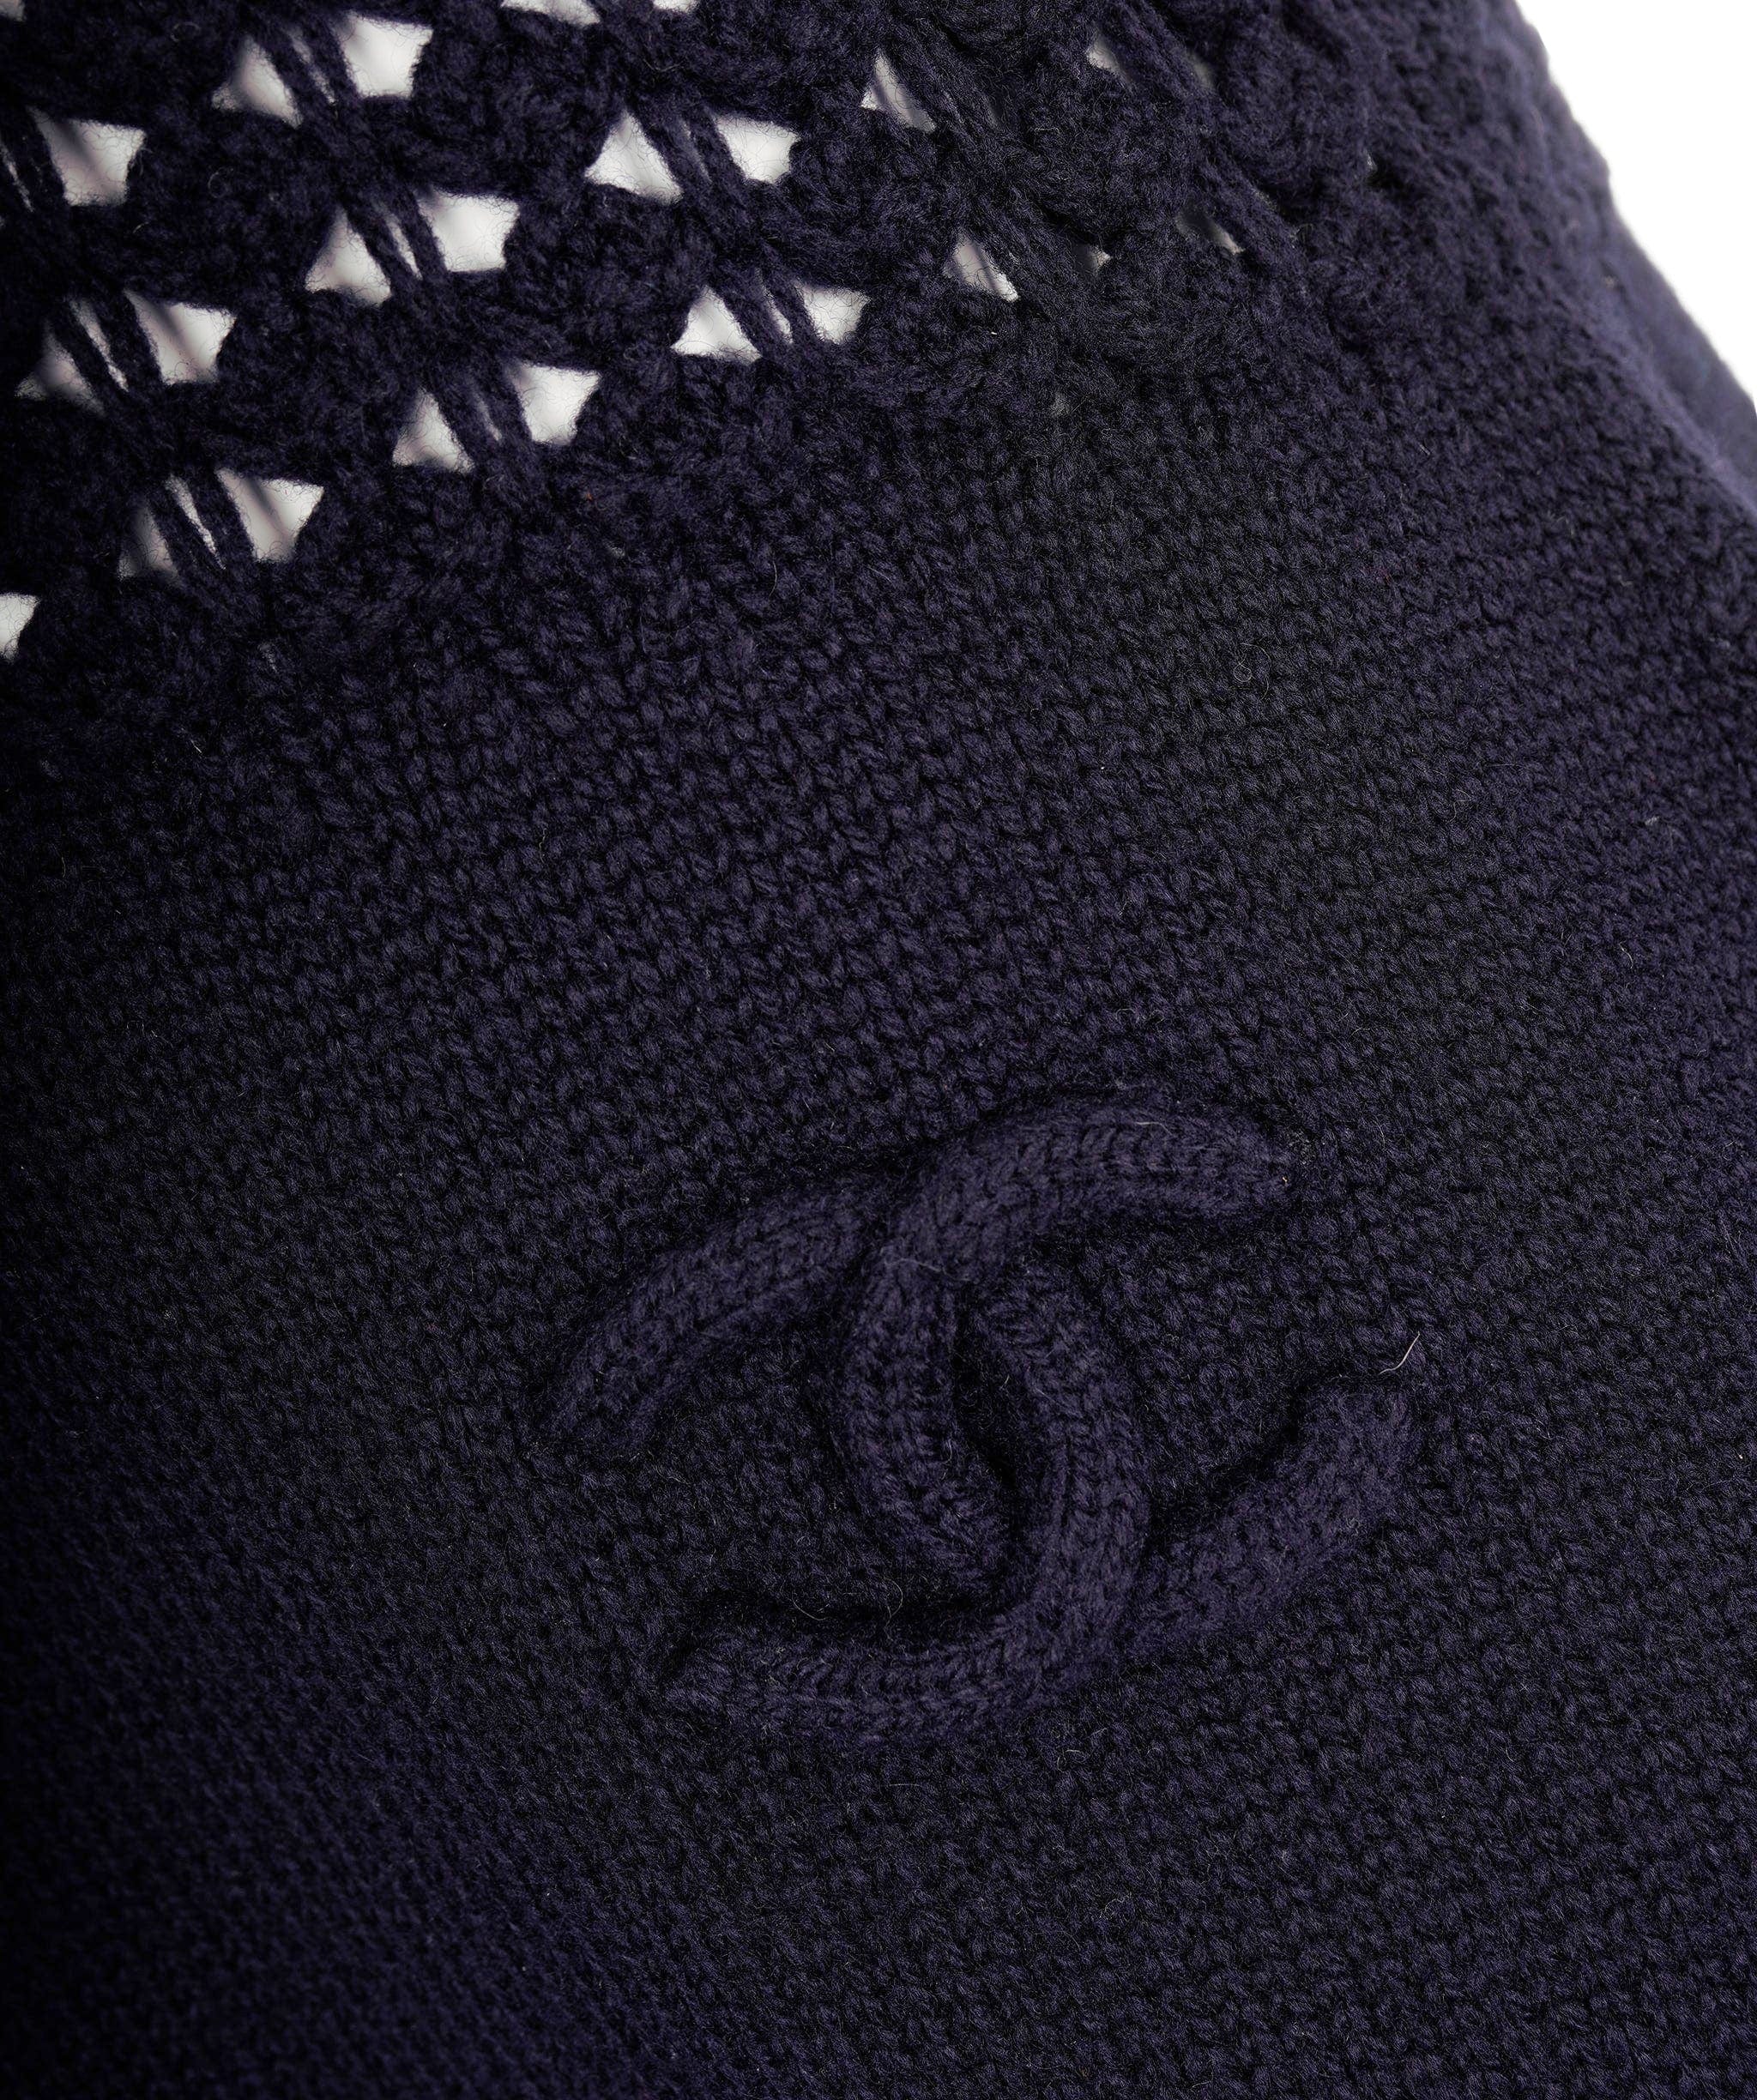 Chanel Chanel CC Cashmere Dress in Navy ASL5143